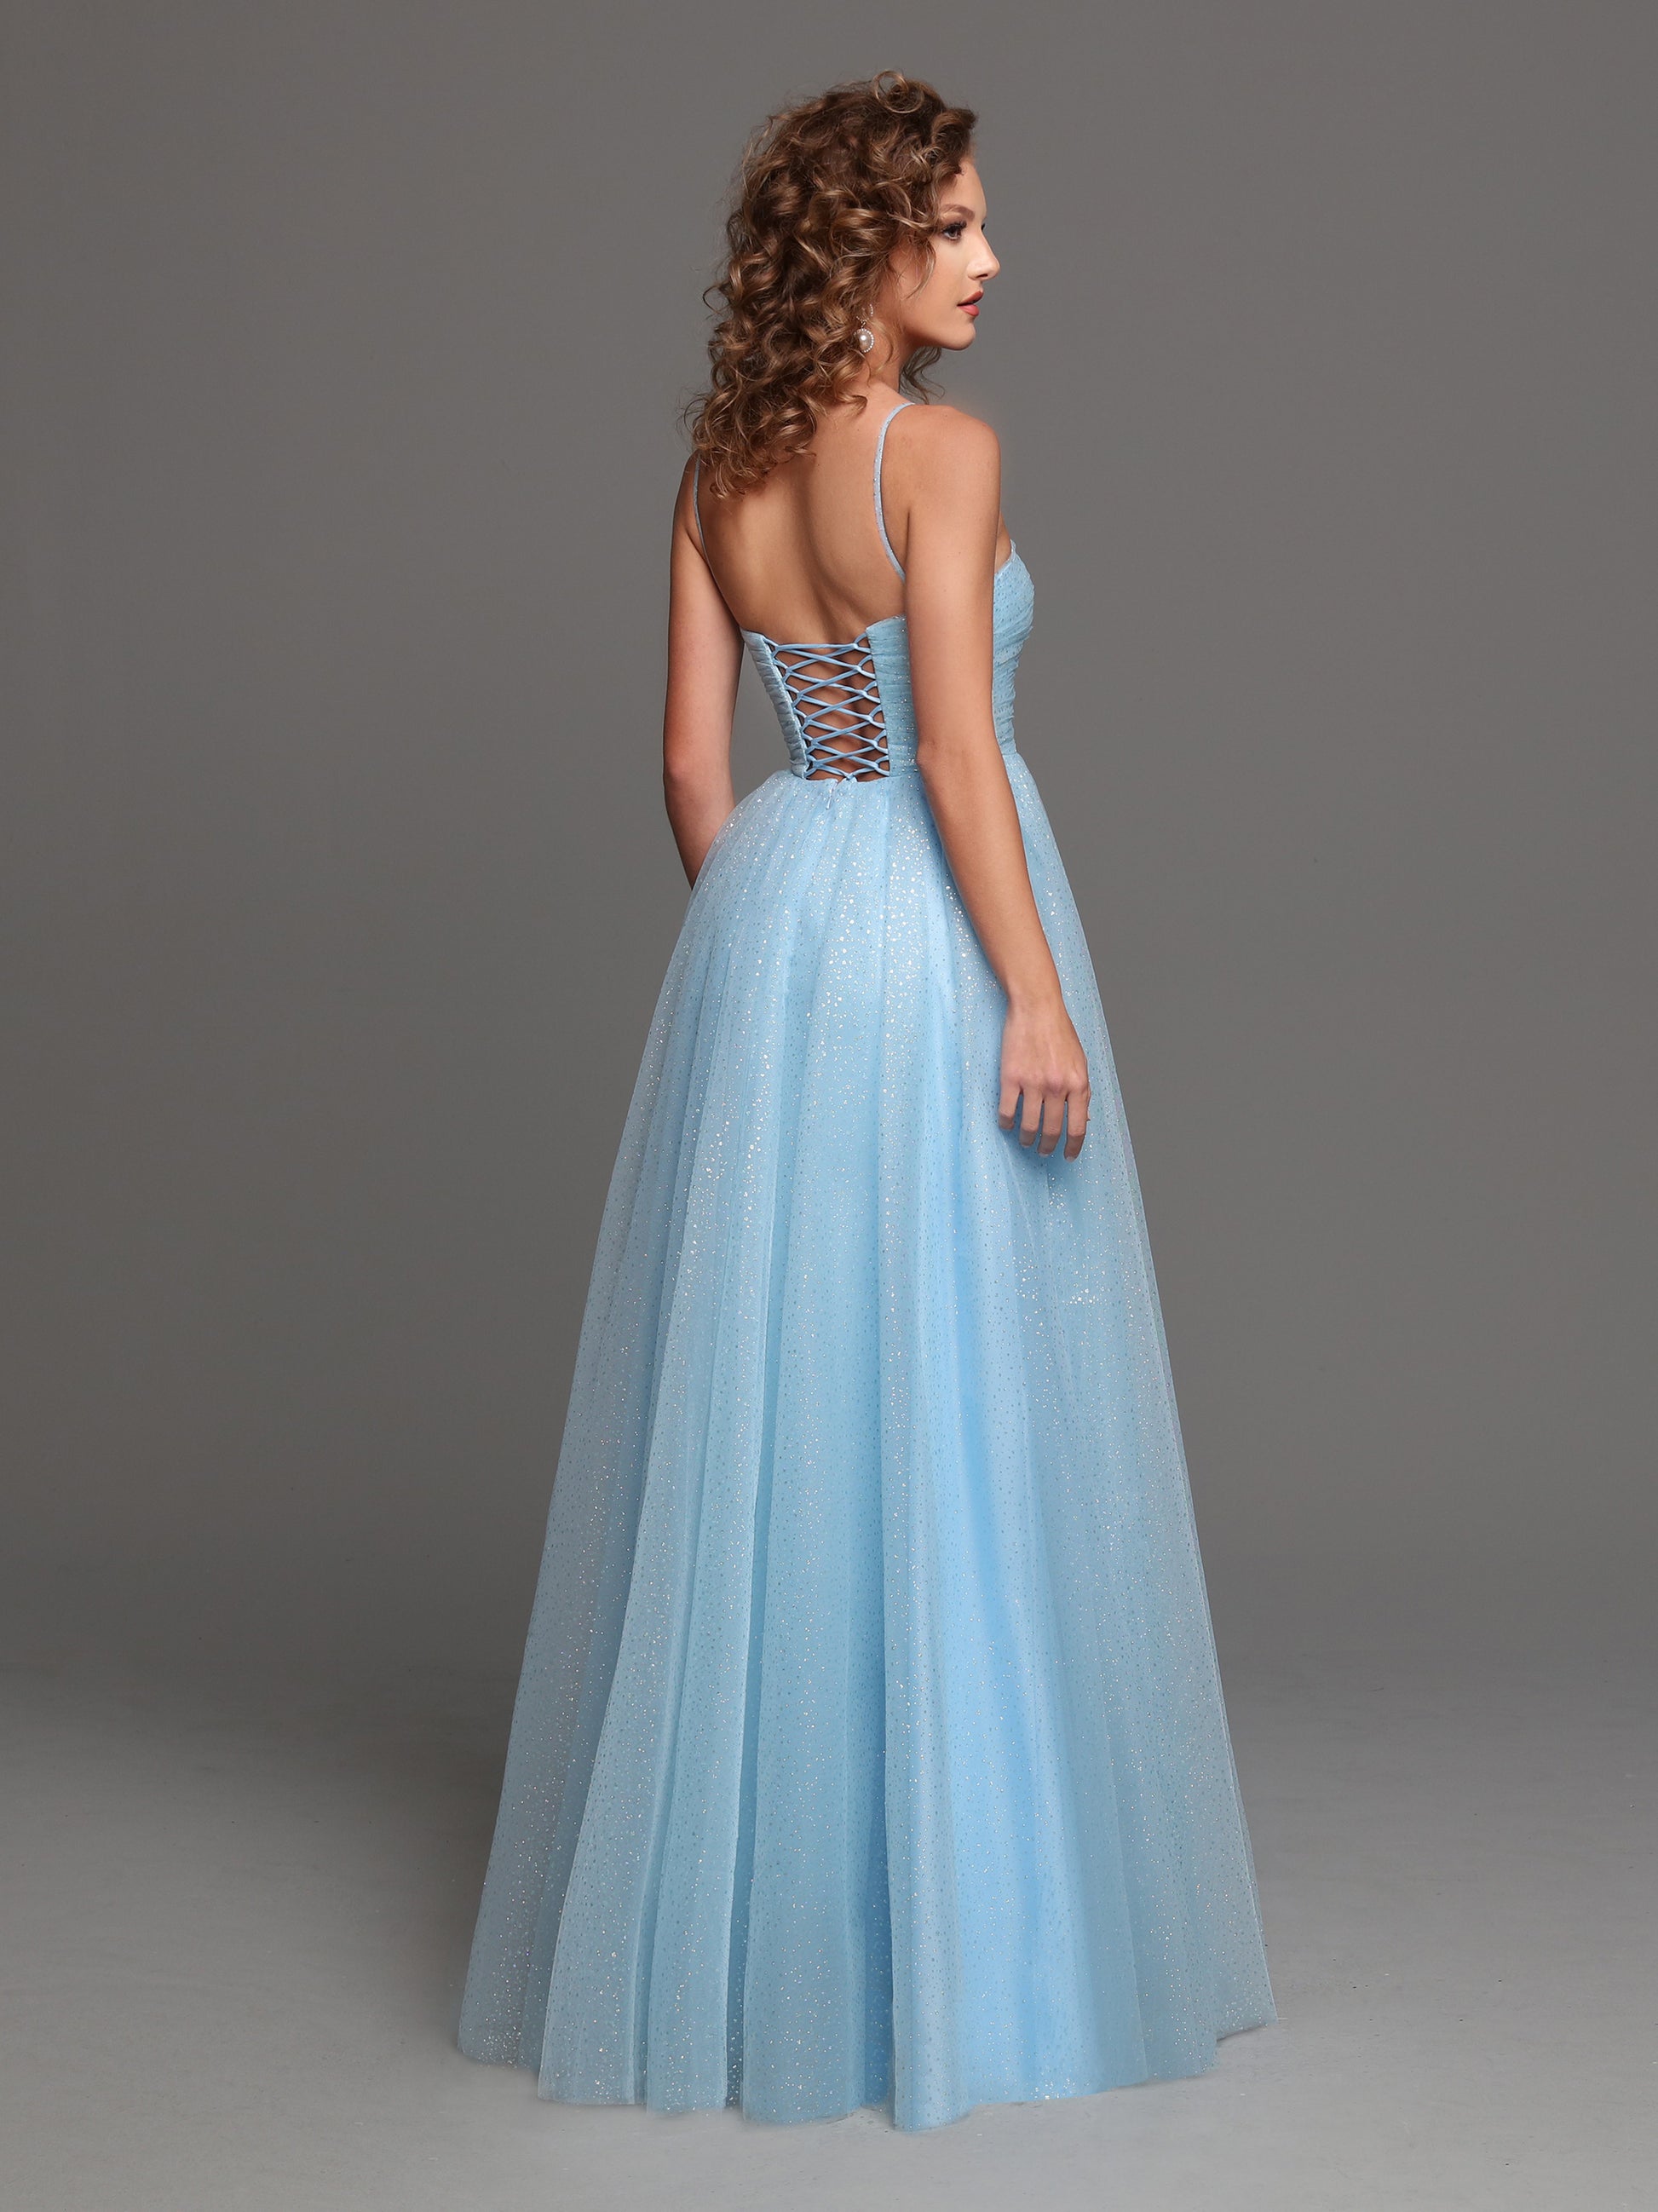 Sparkle Prom Shimmer A Line Prom Dress Pockets Bows Formal Evening Gown Ruched Bodice  Sizes: 0-20  Colors: Fuchsia, Ice Blue